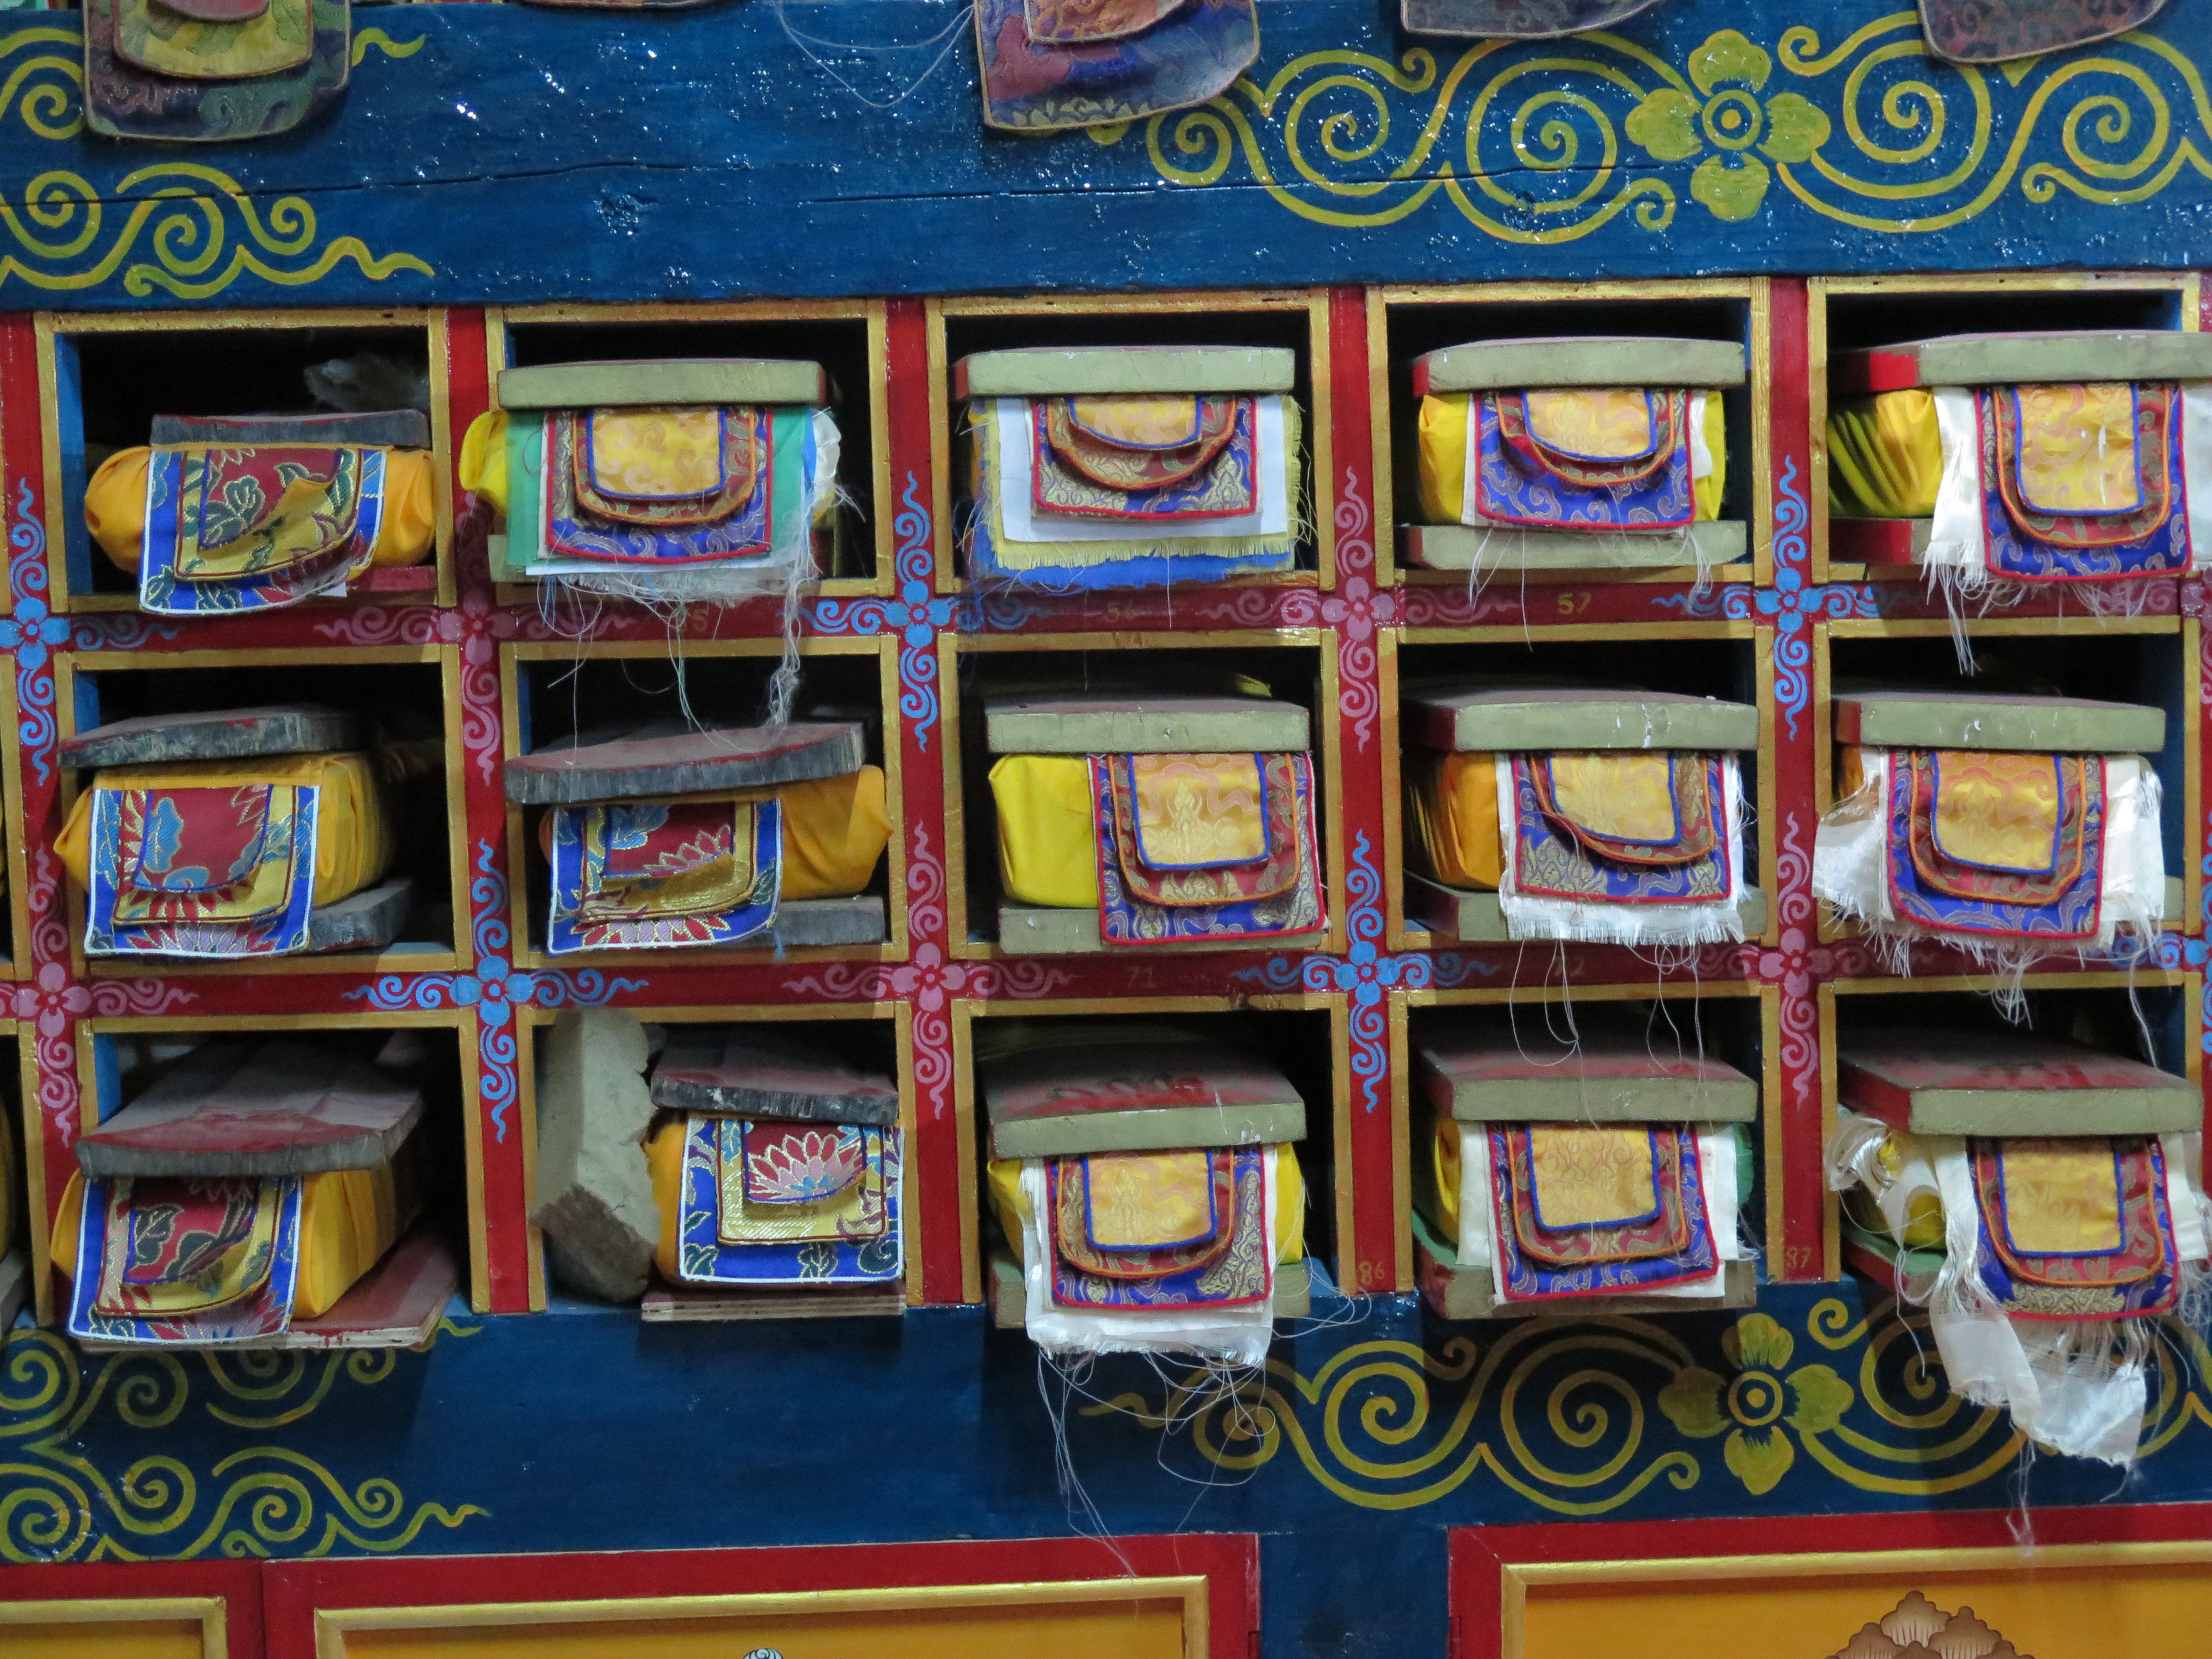 Boxes of ancient papers Khumjung Manastery Nepal